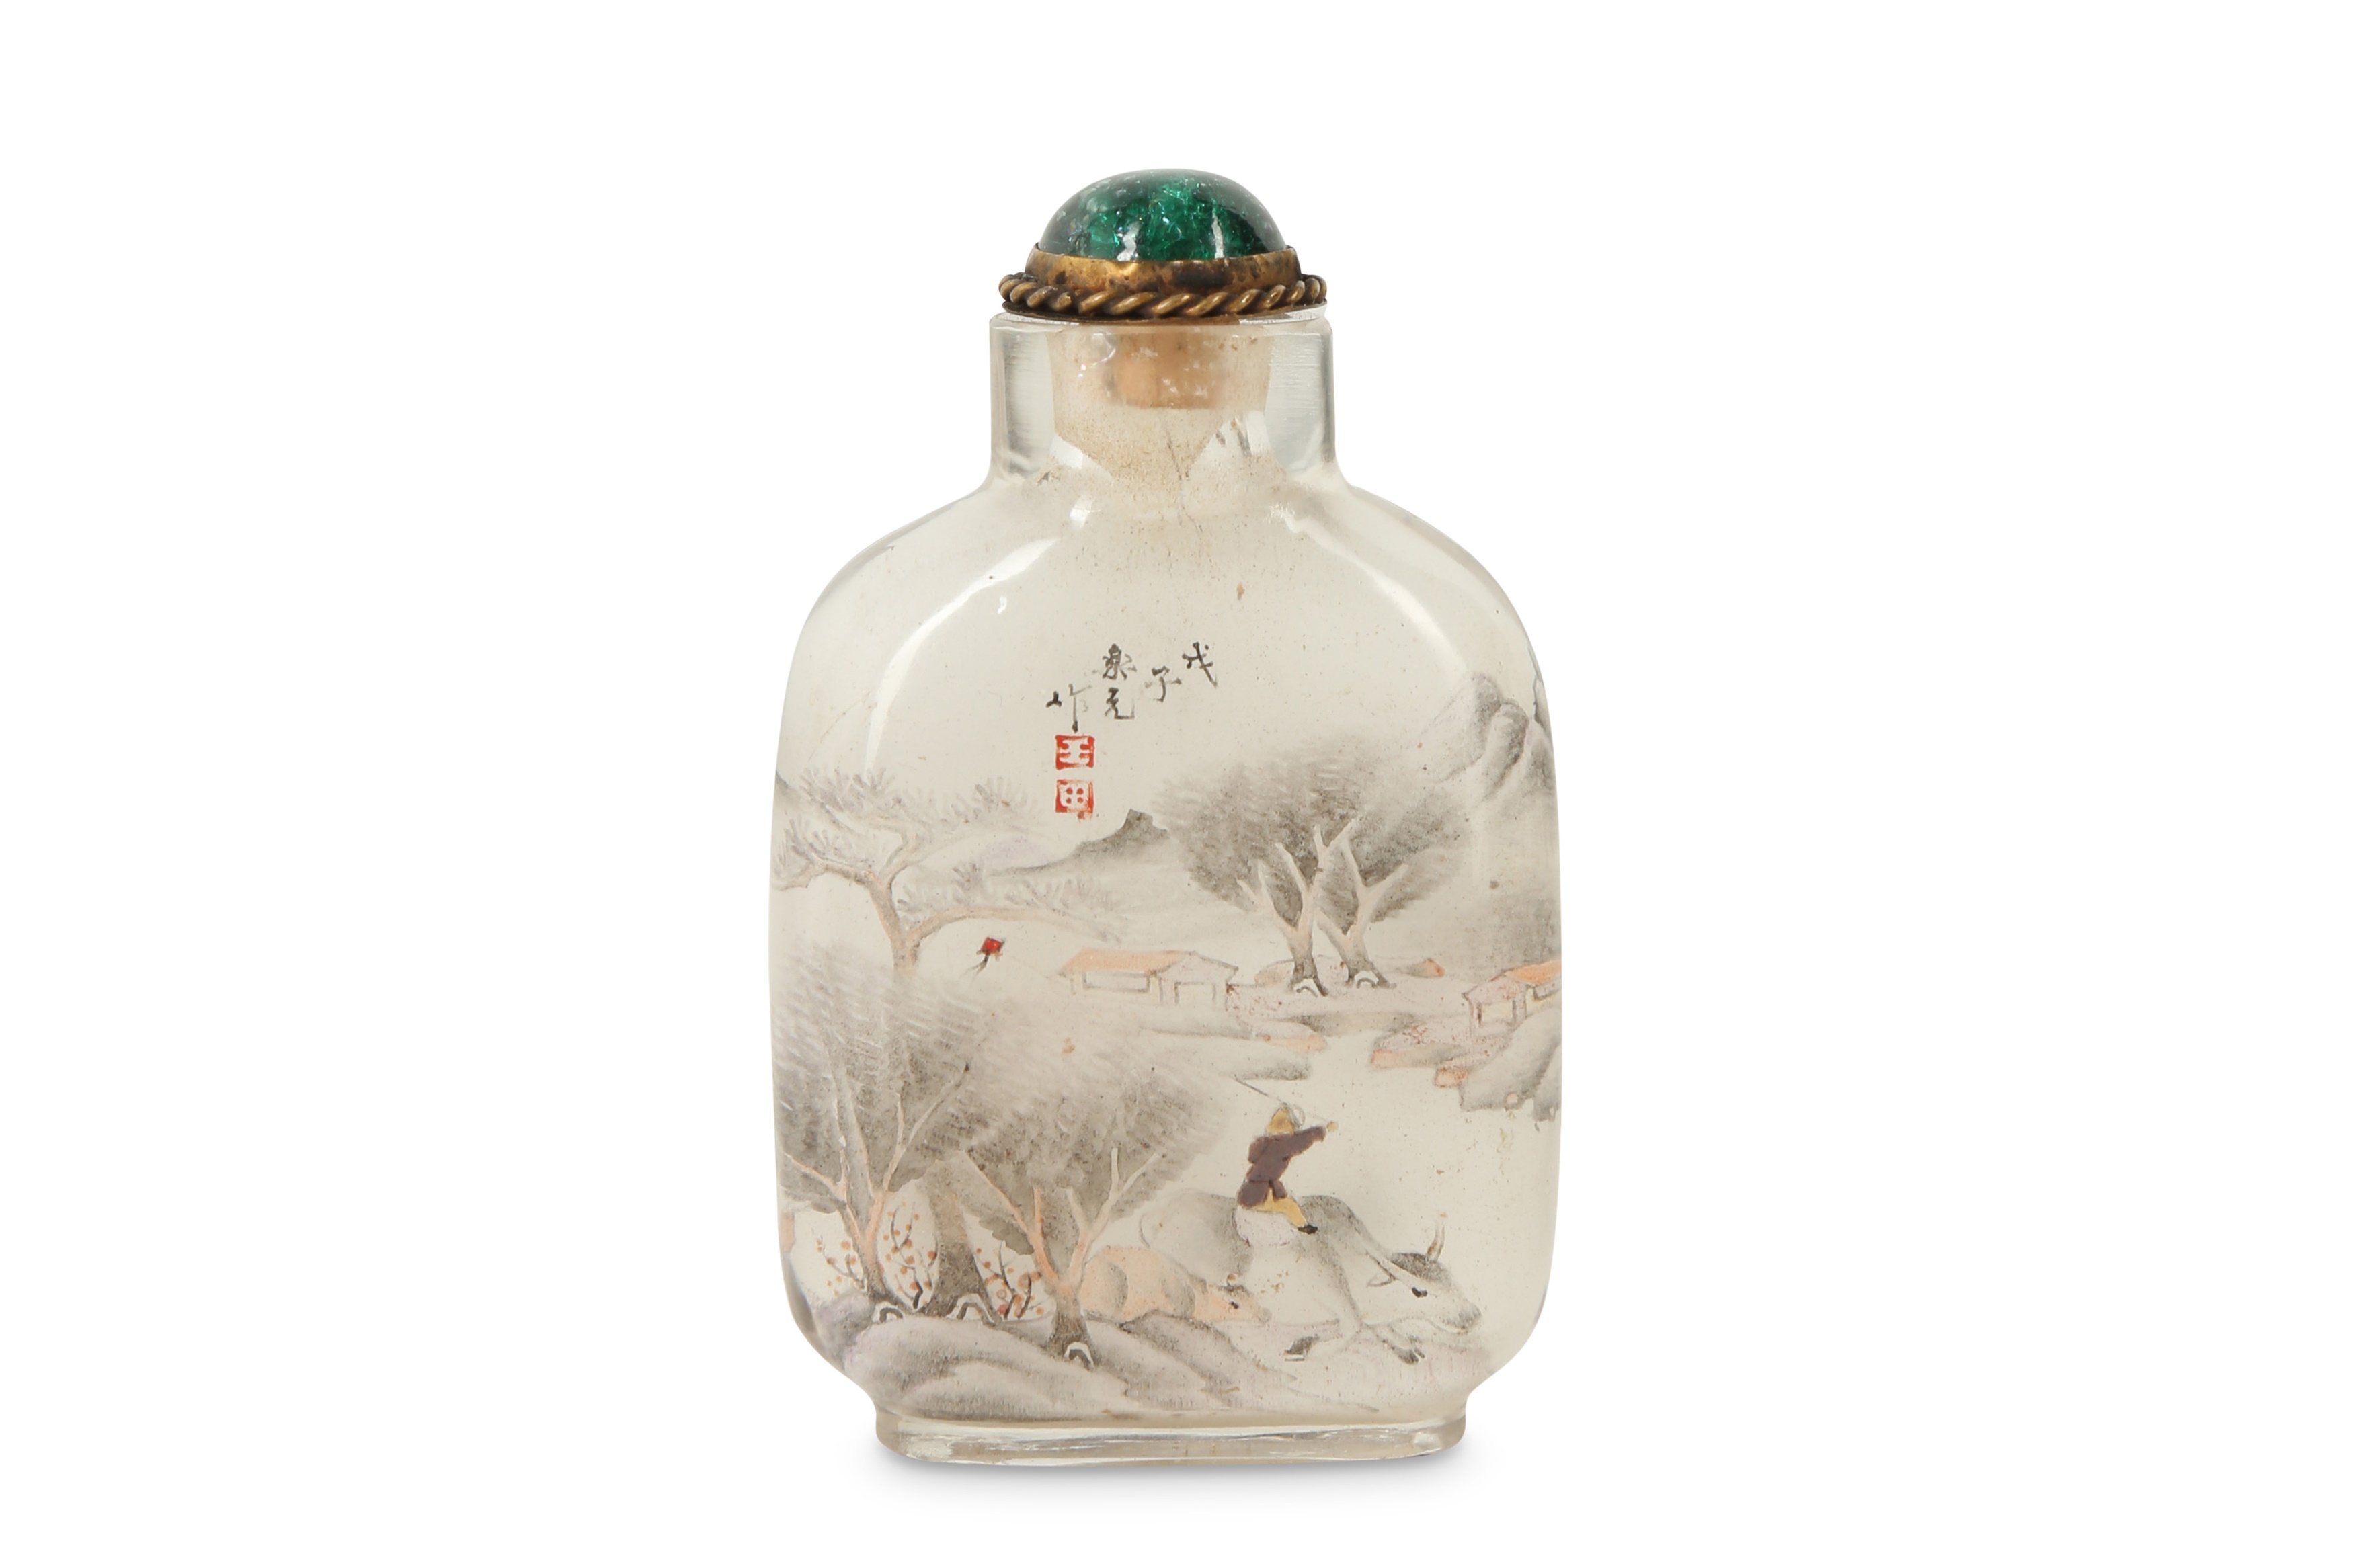 A CHINESE GLASS INSIDE-PAINTED 'LANDSCAPE' SNUFF BOTTLE, BY ZHOU LEYUAN.